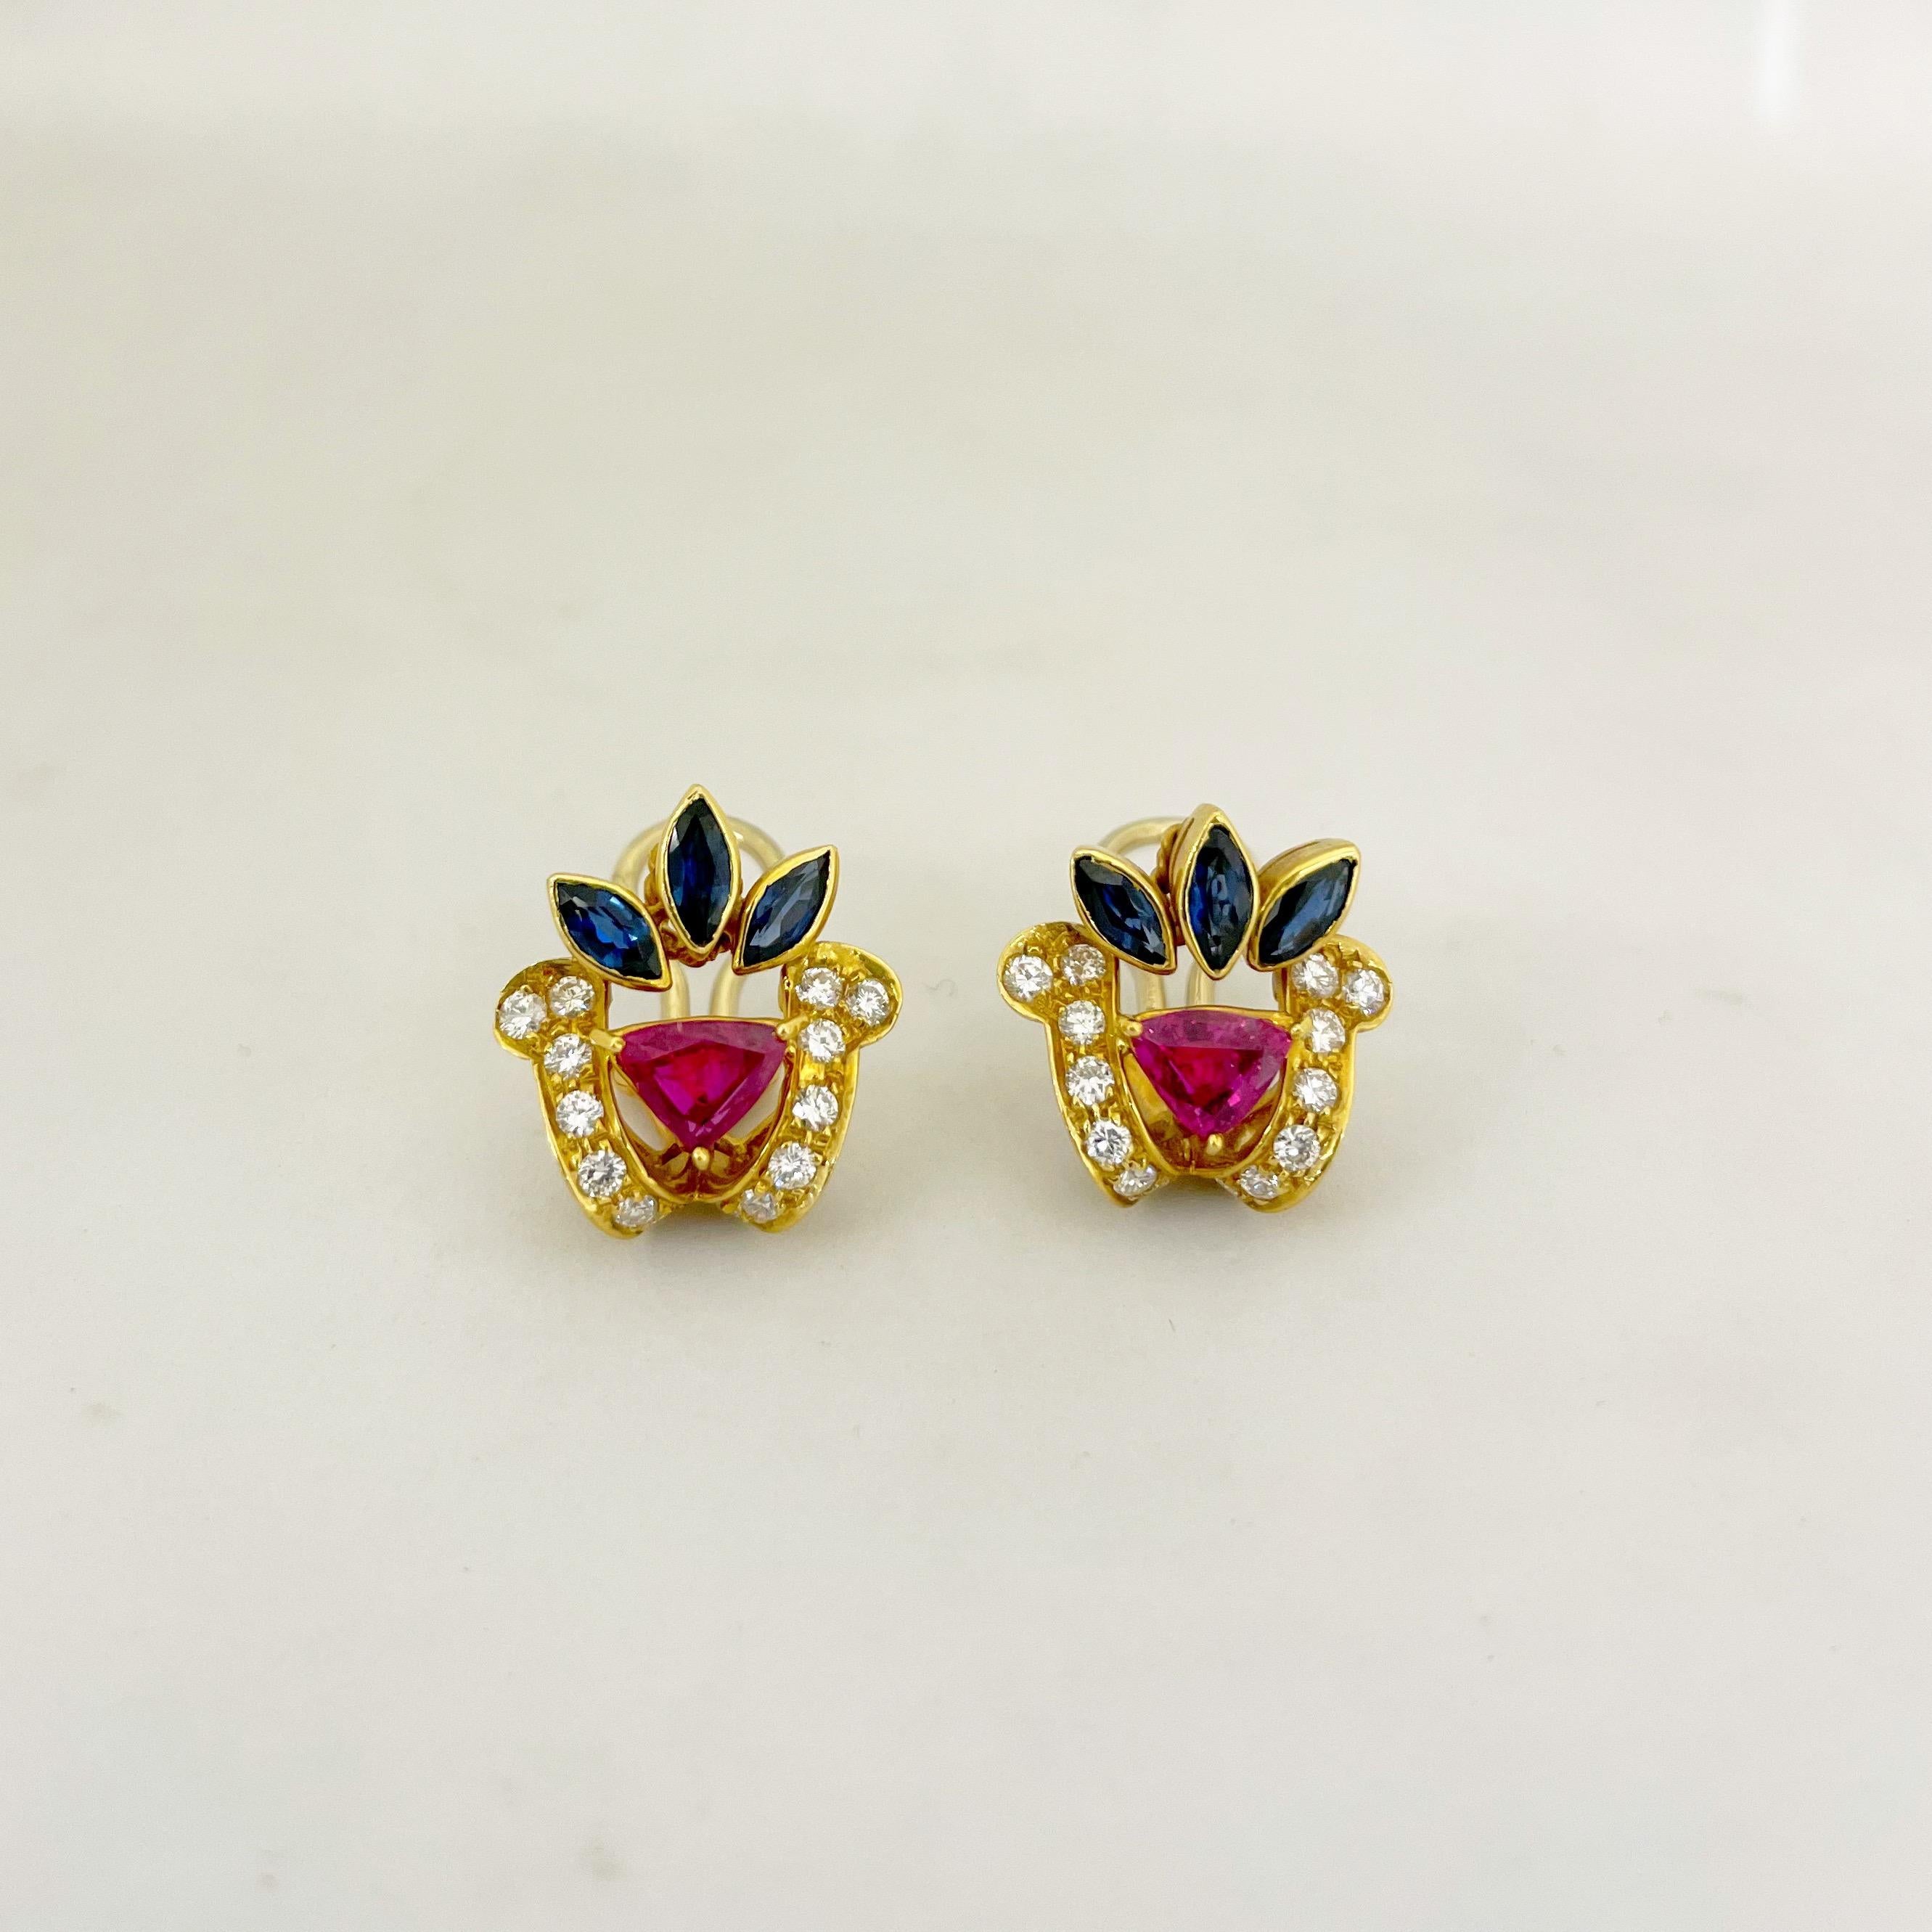 18 karat yellow gold earrings beautifully designed with marquis blue sapphires, trillion cut rubies and round brilliant diamonds. These earrings measure 7/8